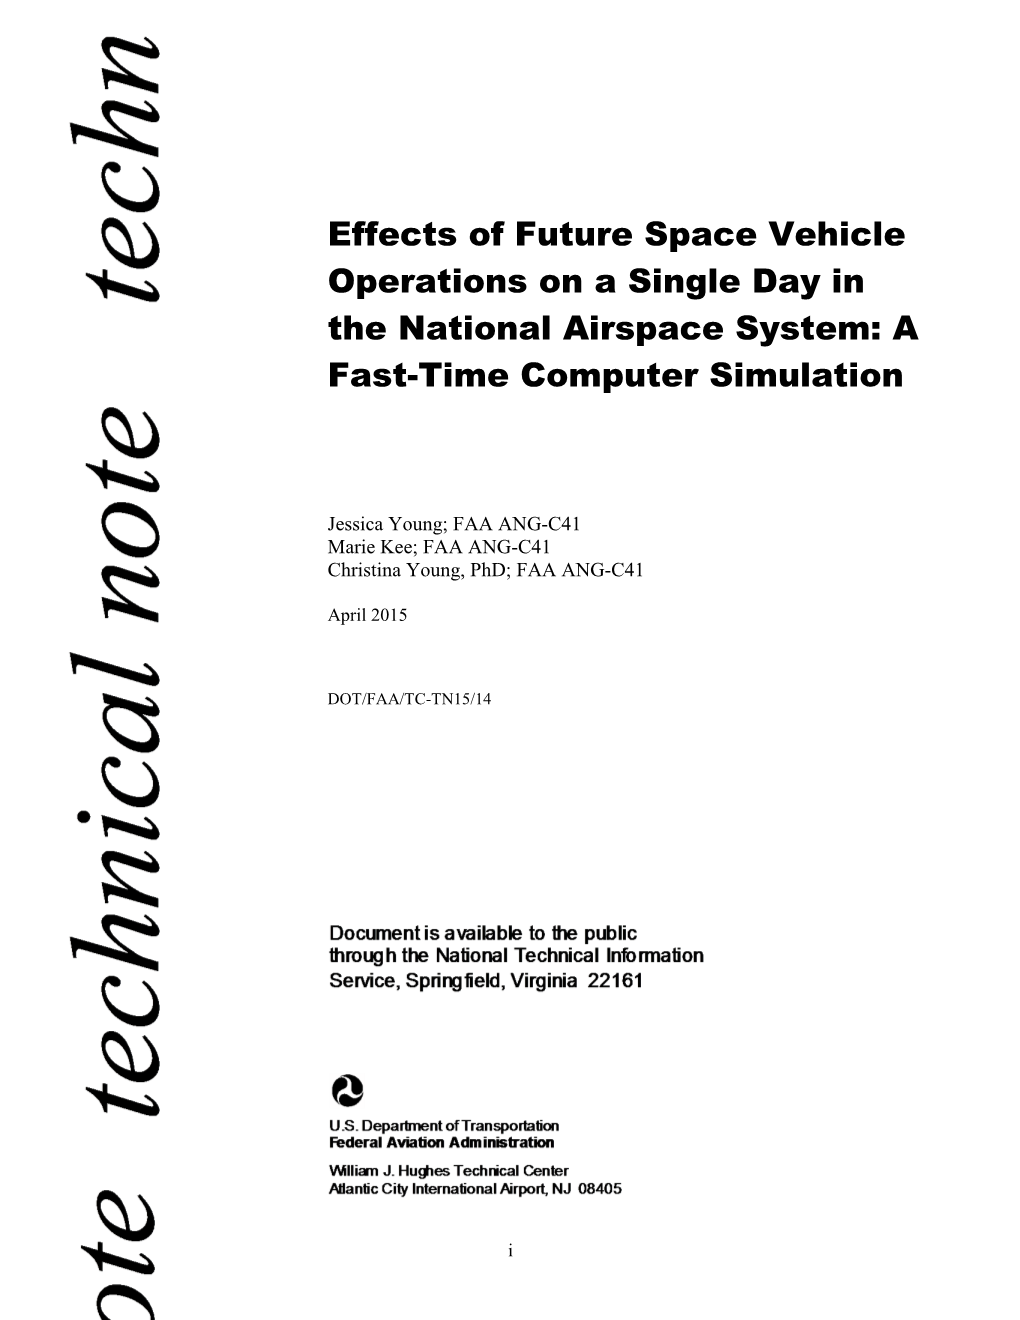 Effects of Future Space Vehicle Operations on a Single Day in the National Airspace System: a Fast-Time Computer Simulation